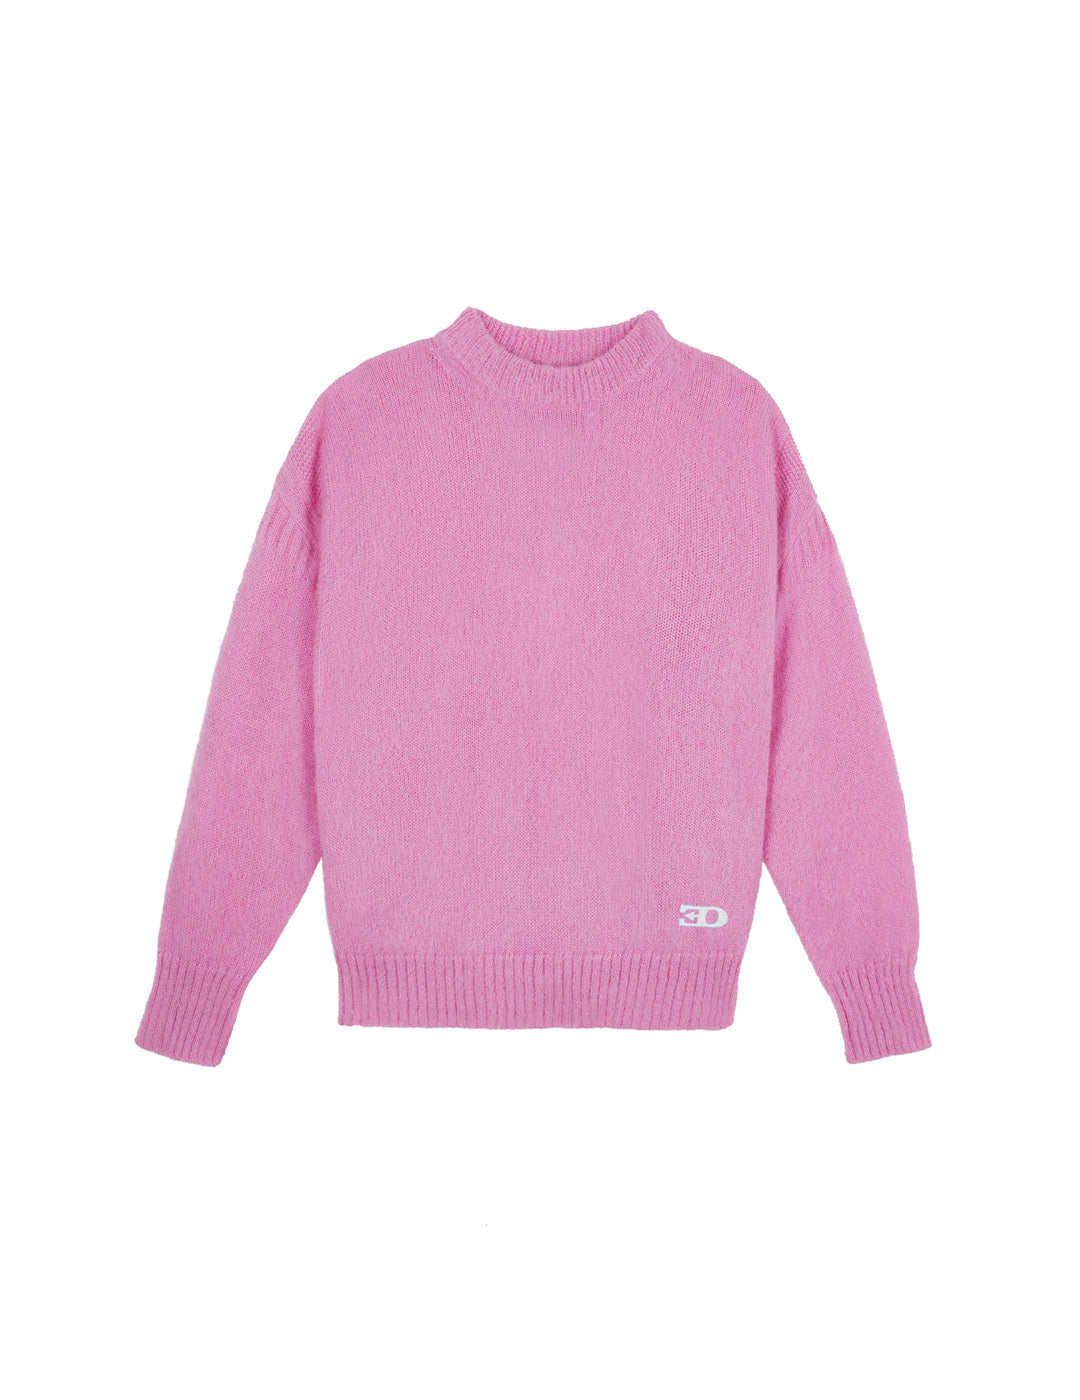 THE GUERNSEY JUMPER IN PINK MOHAIR